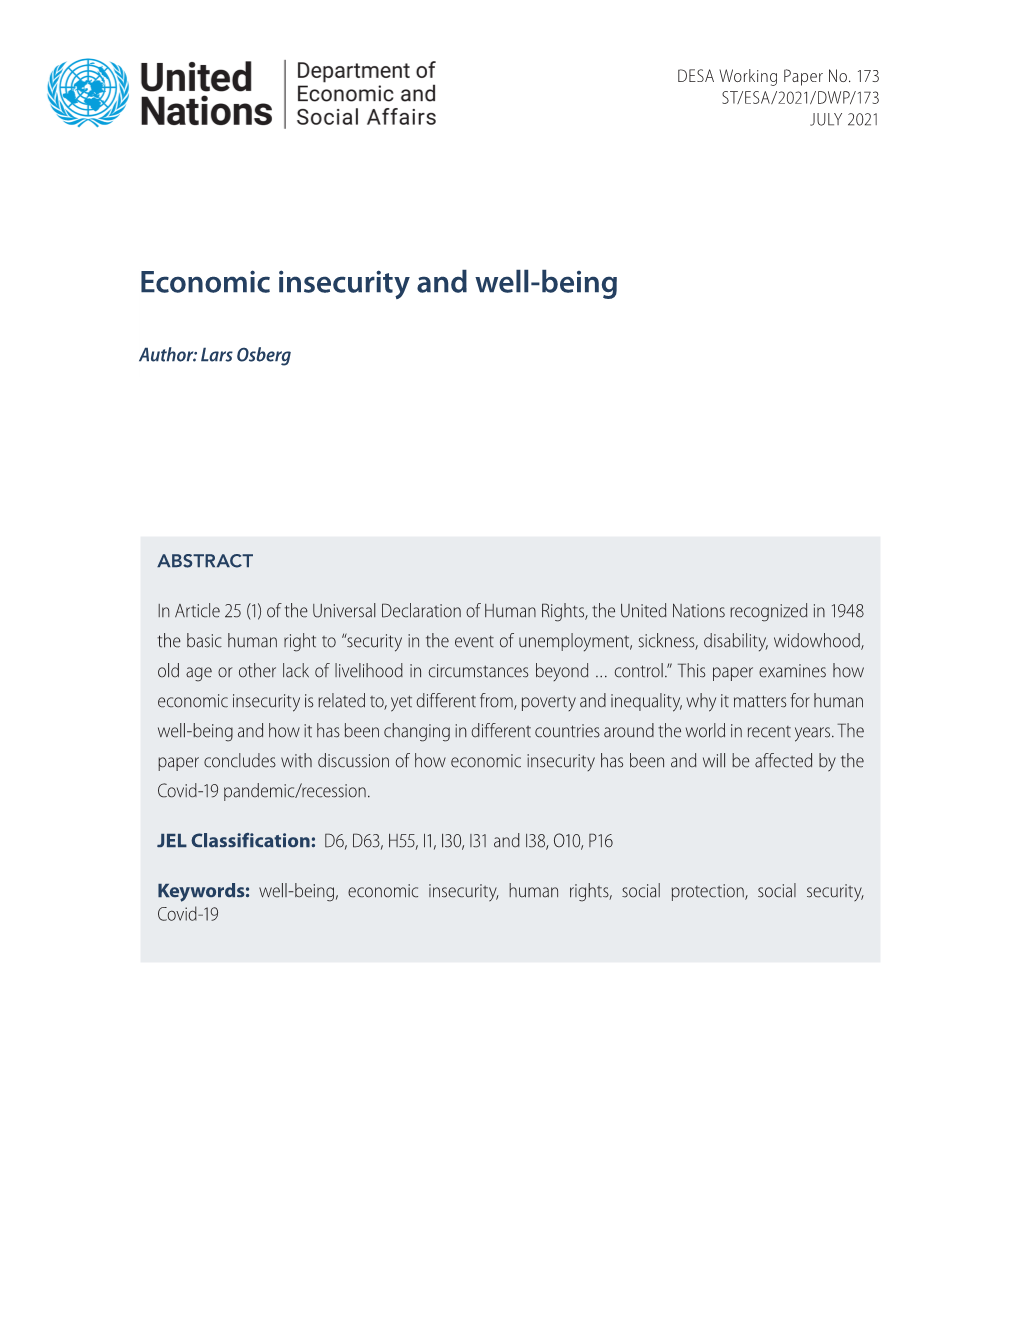 Economic Insecurity and Well-Being